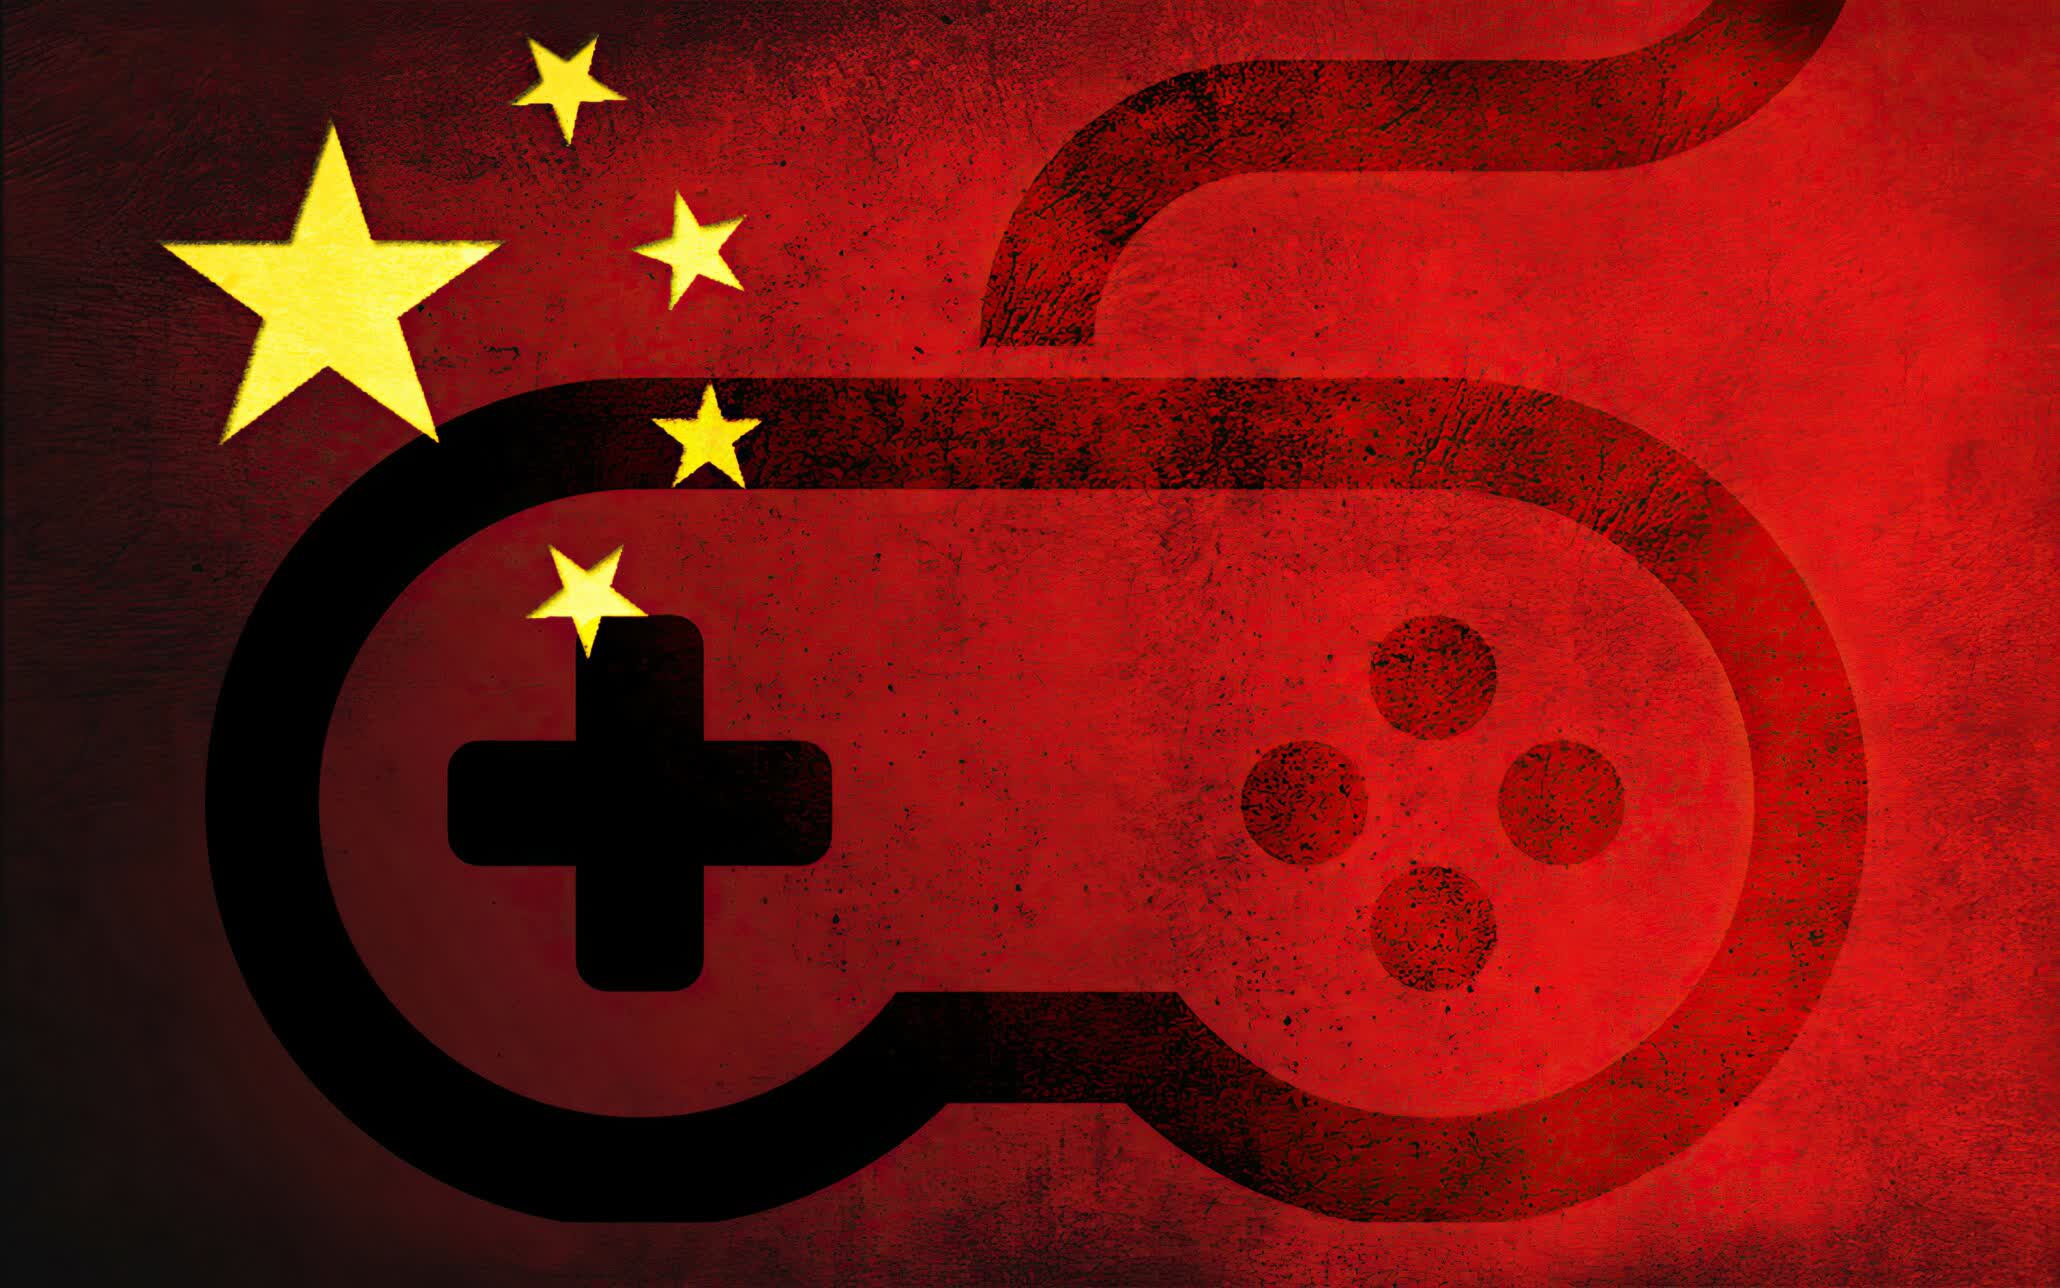 Criminals in China are scamming children desperate for more online gaming time